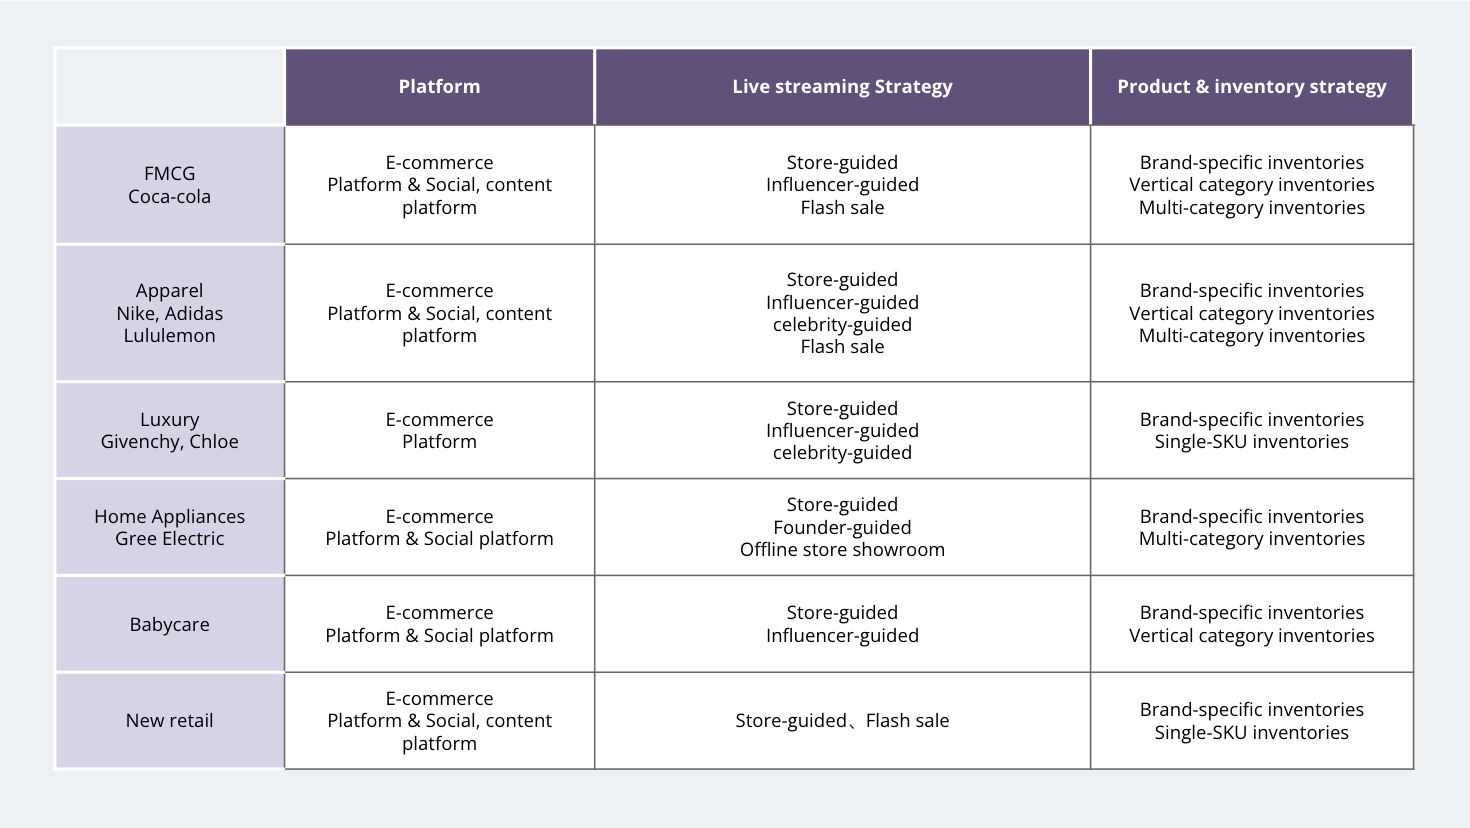 Overview of live streaming in retail categories